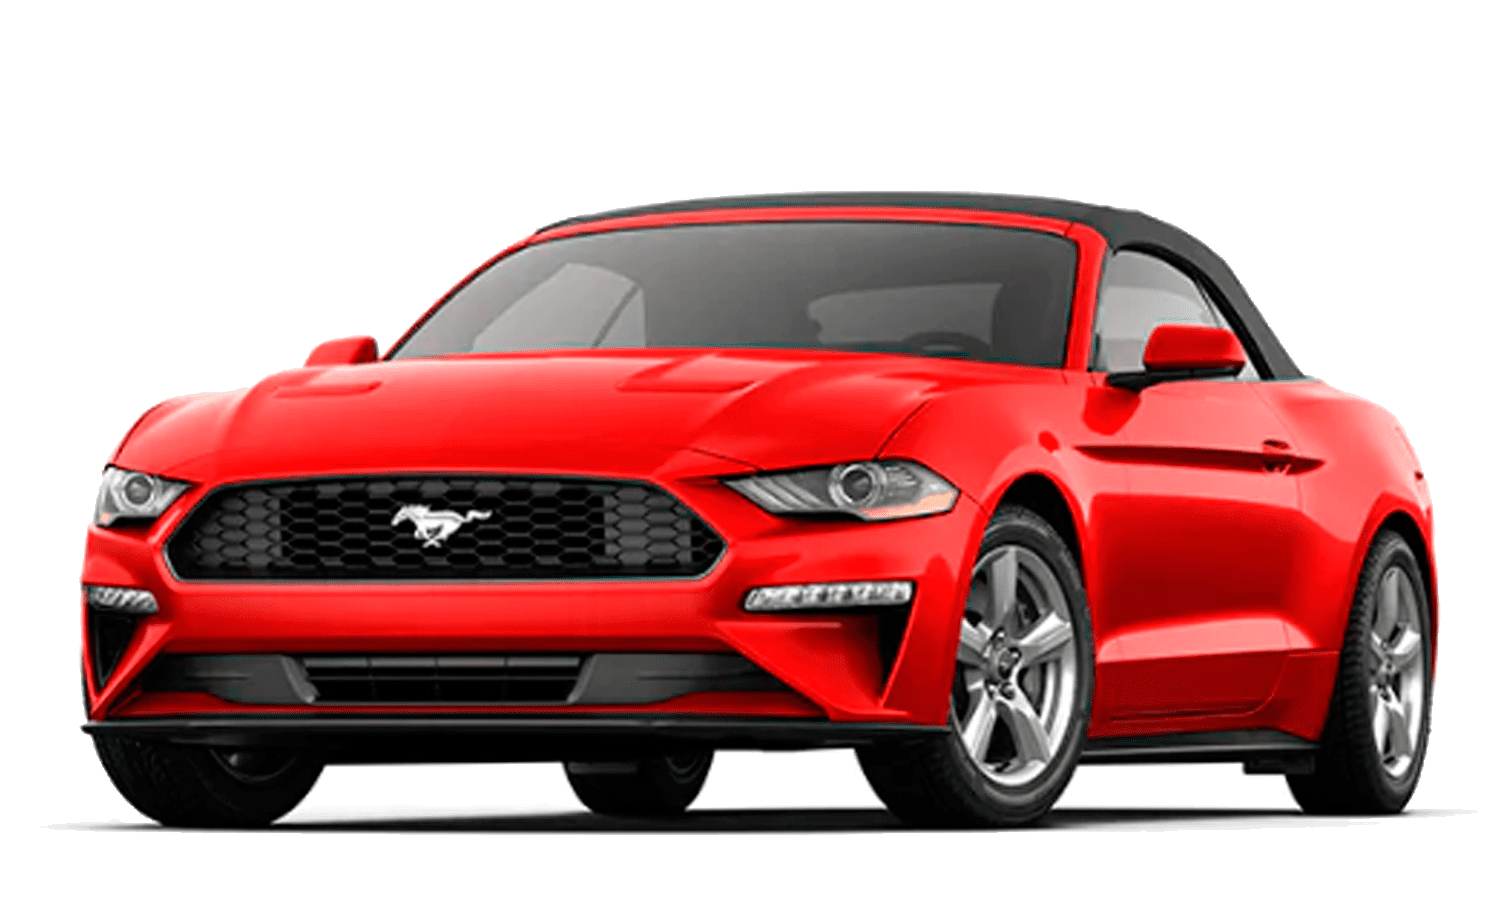 Ford Mustang 5.0 GT Jancars, High-end, sports and luxury car rental